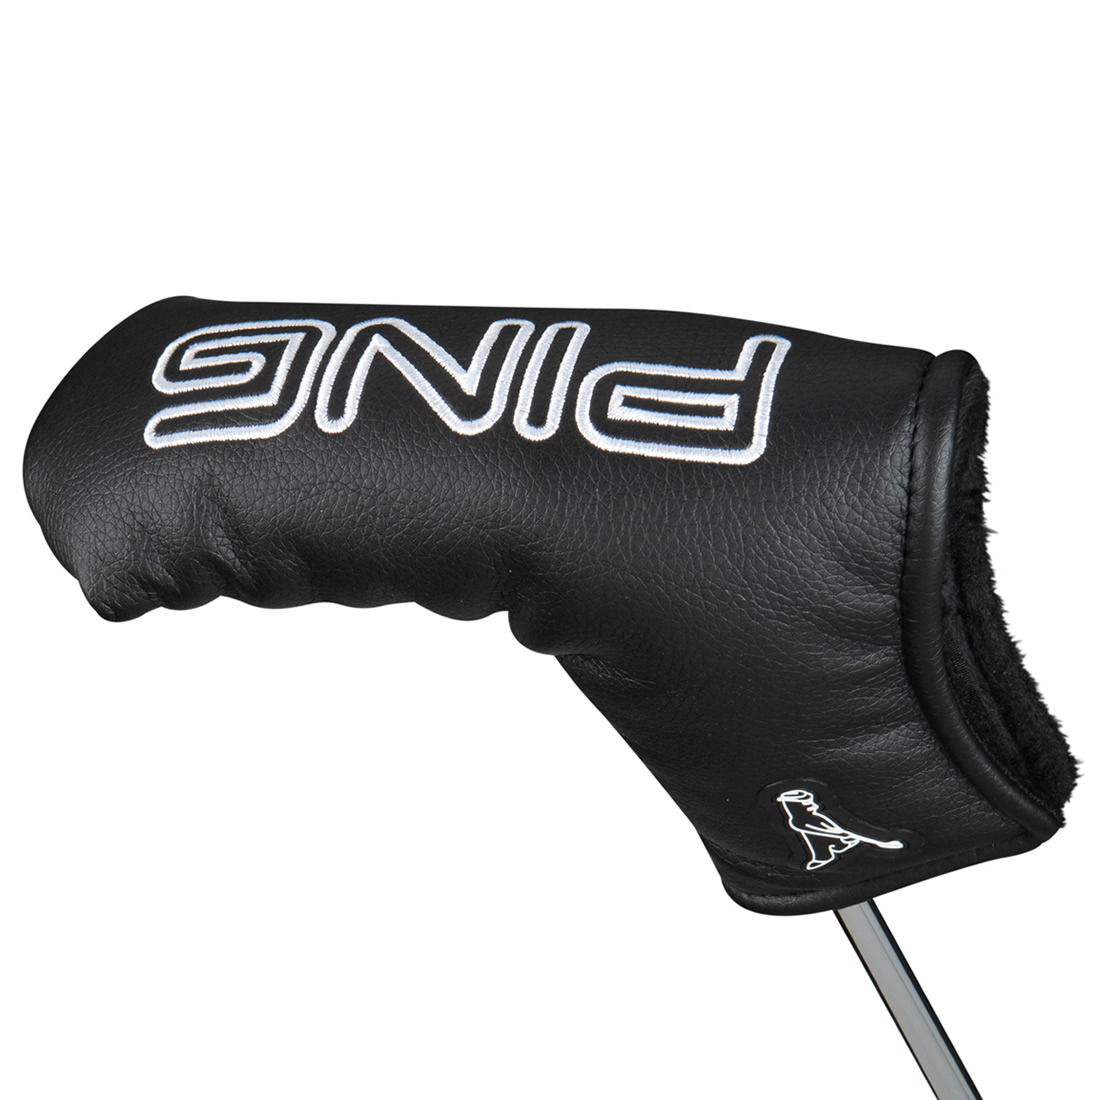 Ping 2016 Blade Putter Cover Black/White | Scottsdale Golf